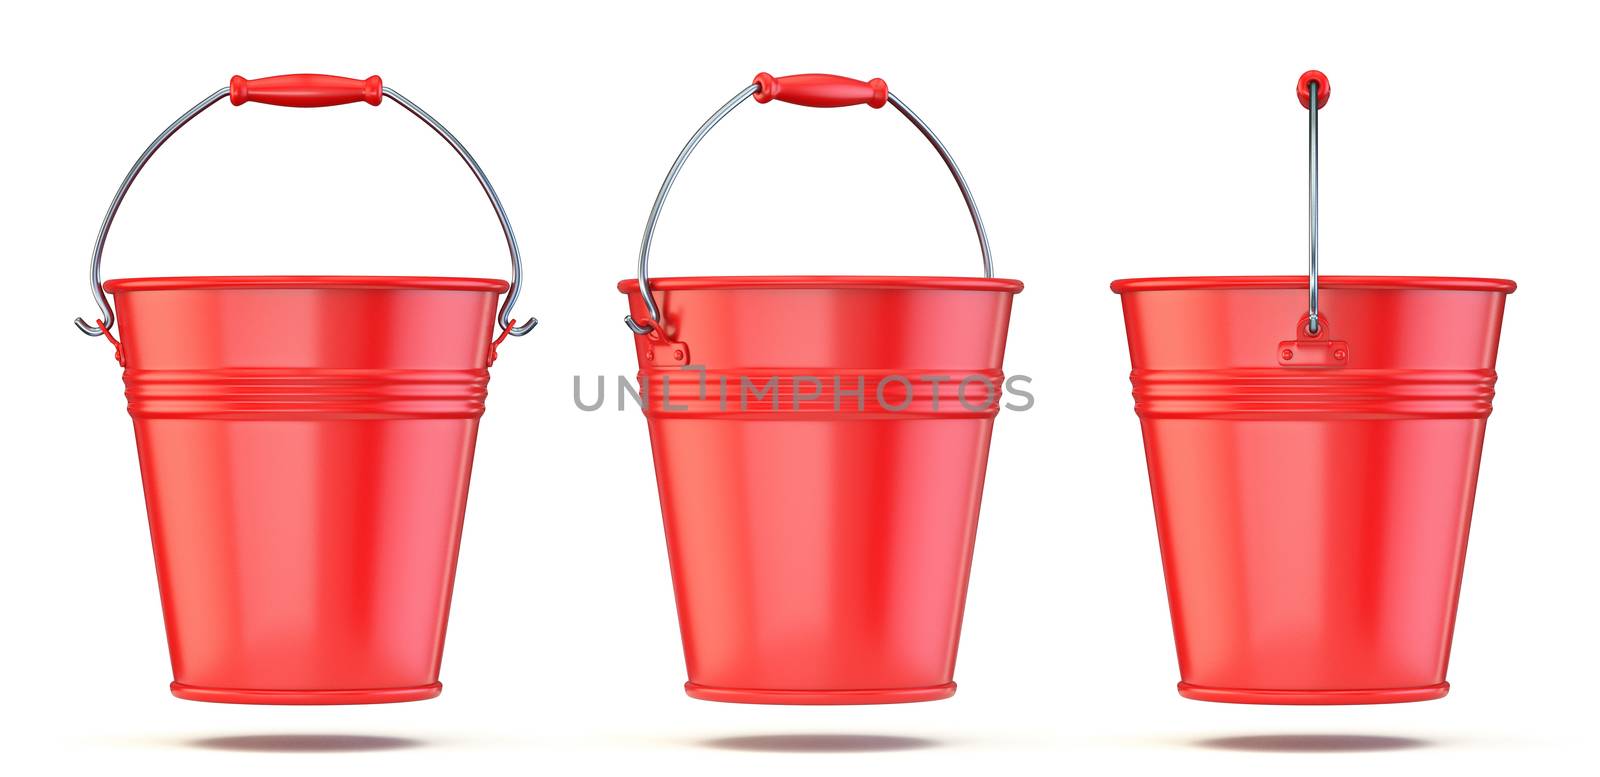 Red bucket 3D render illustration isolated on white background